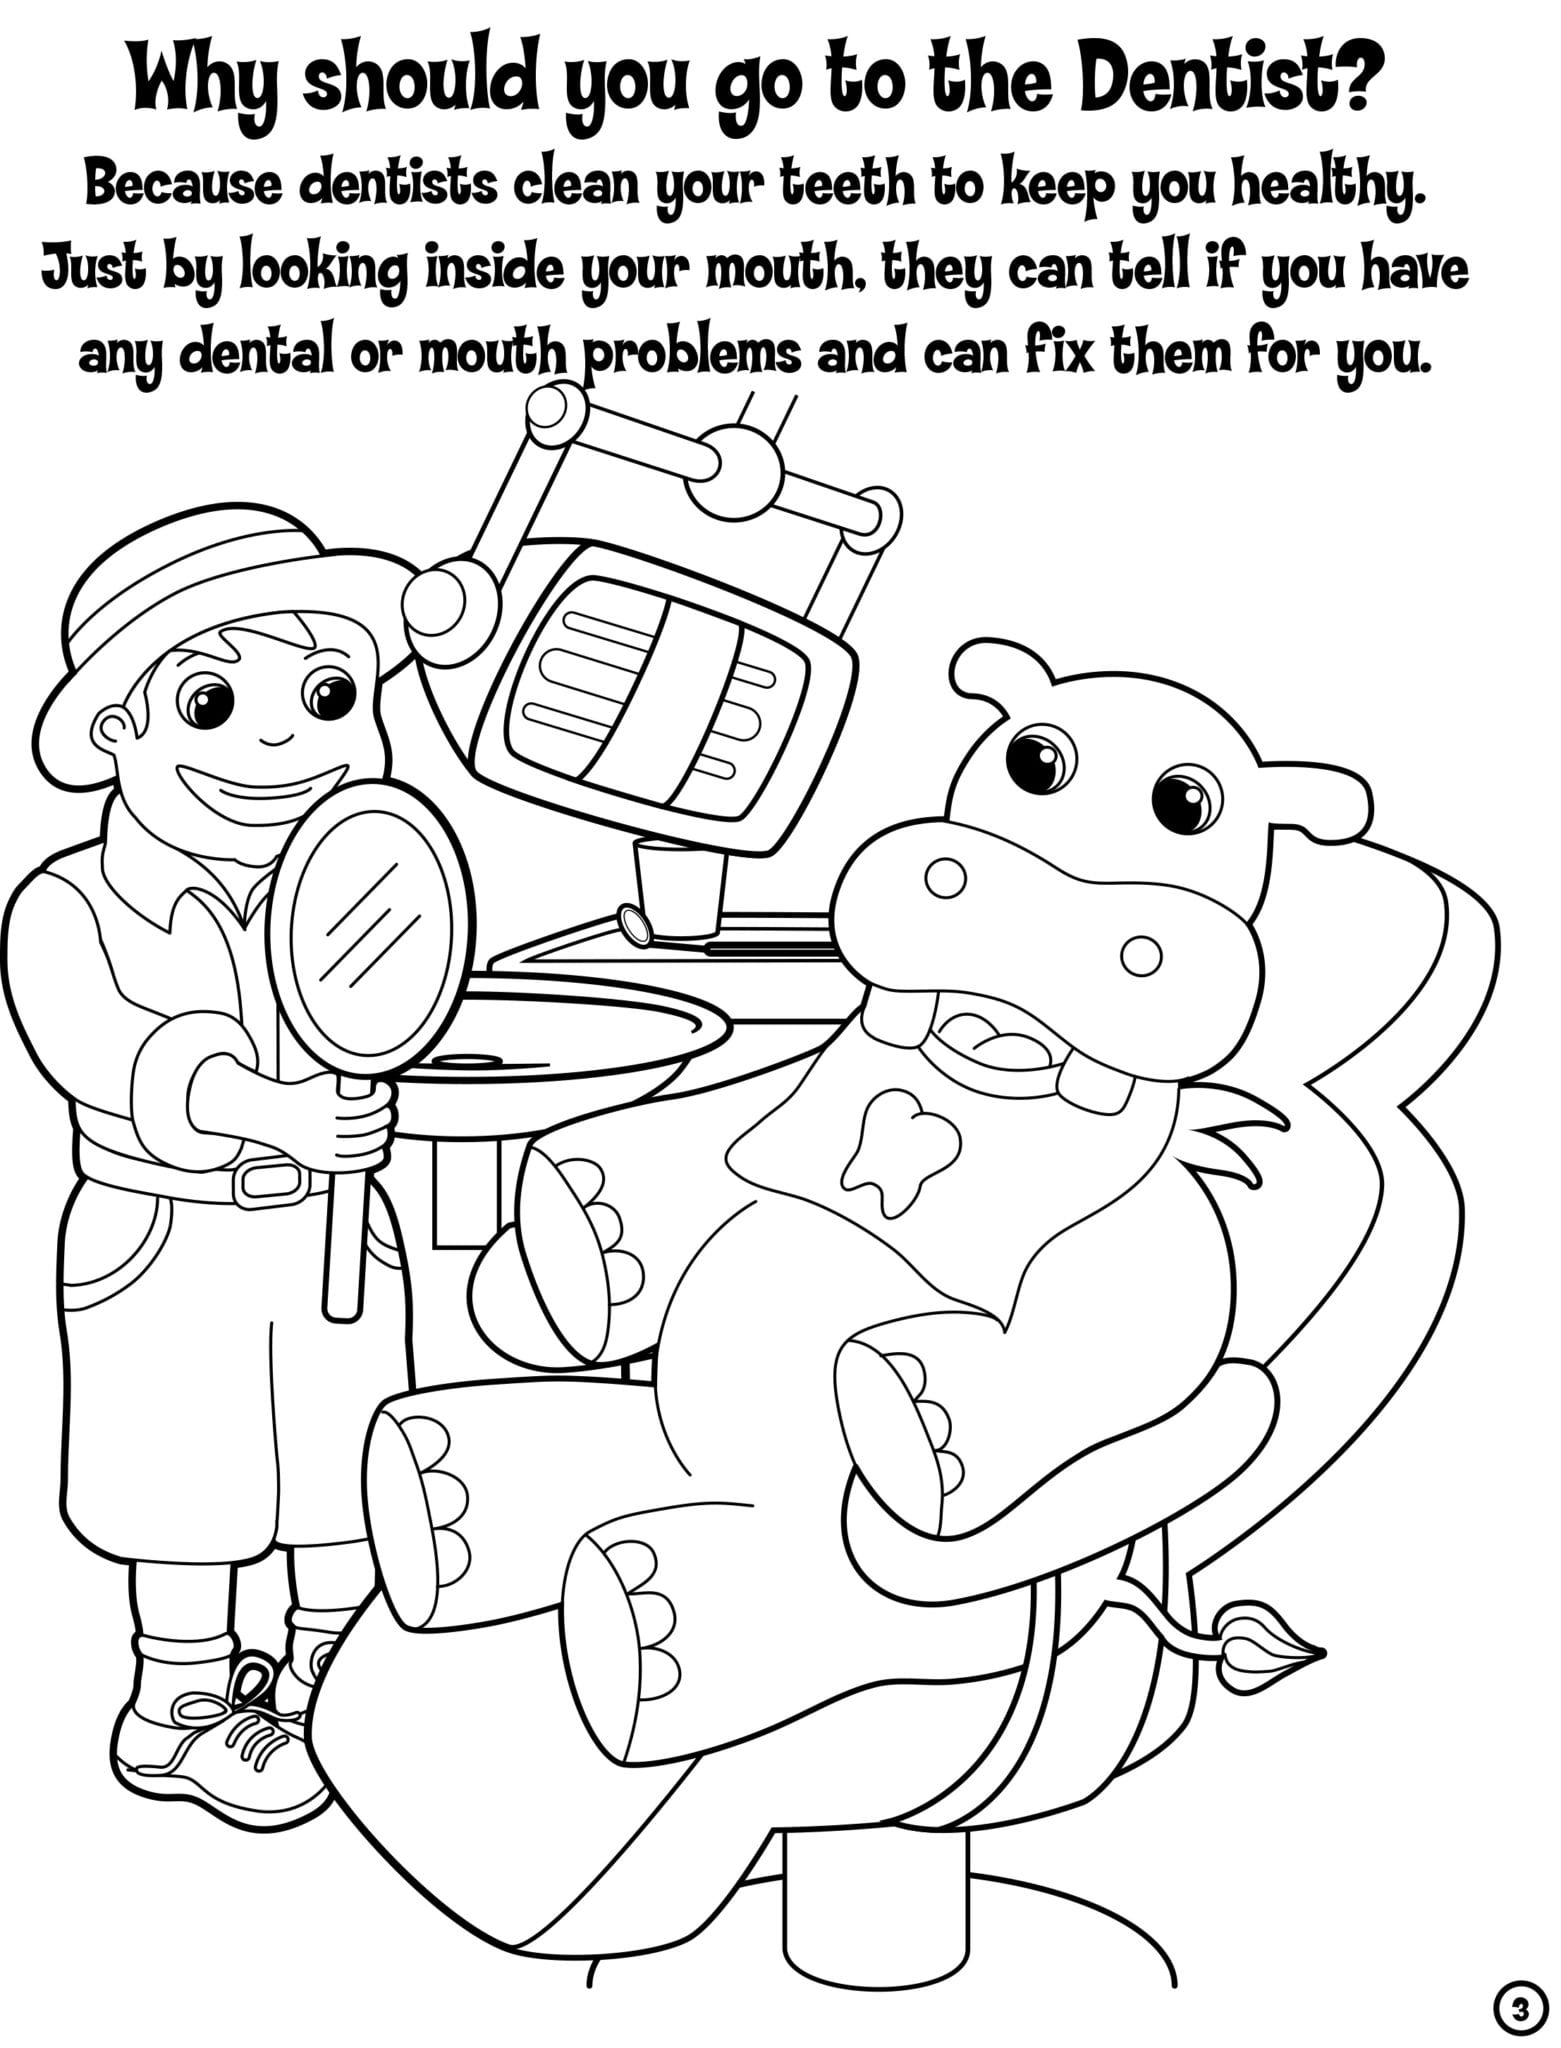 printable coloring page that explains the importance of going to the dentist